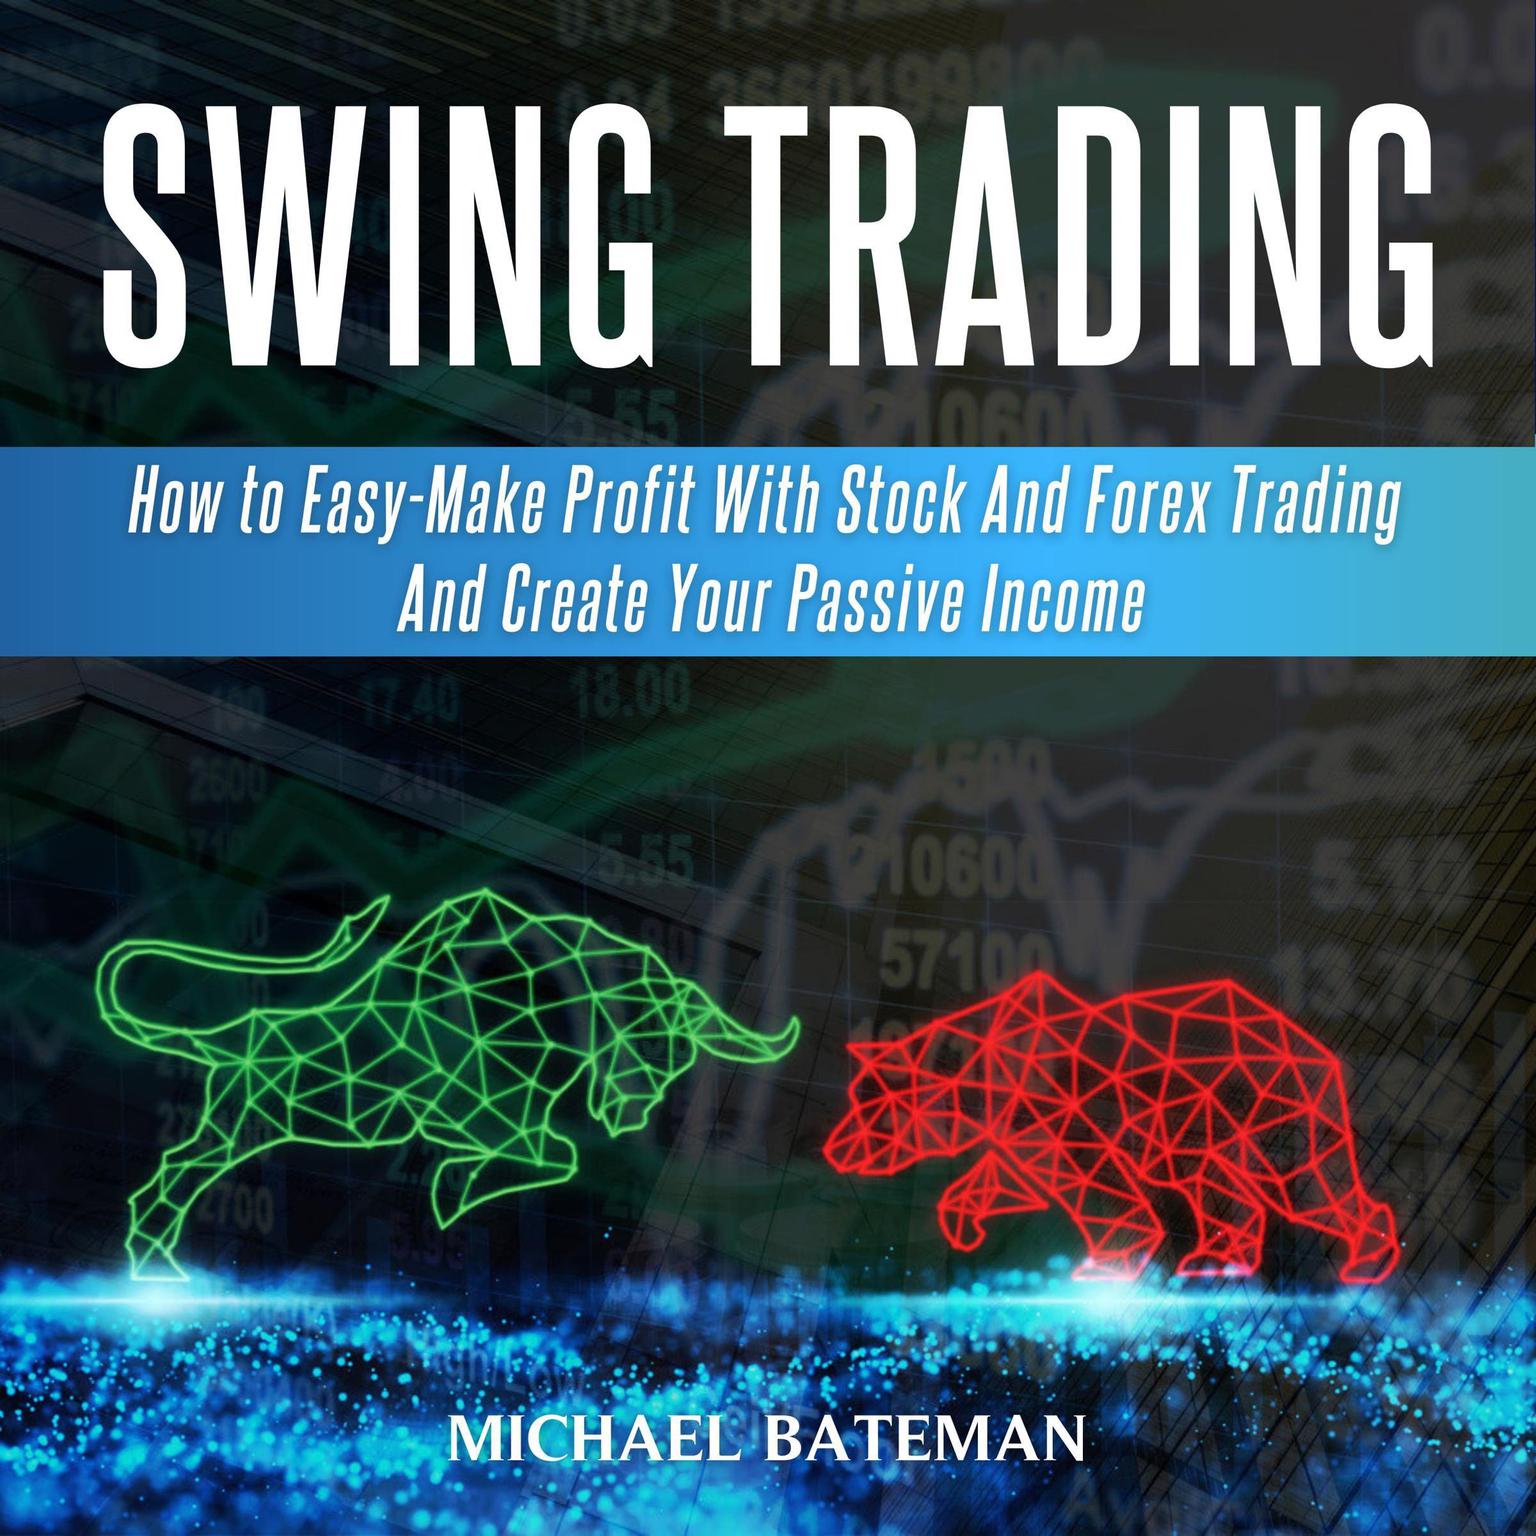 Swing Trading: How to Easy-Make Profit with Stock and Forex Trading and Create Your Passive Income Audiobook, by Michael Bateman